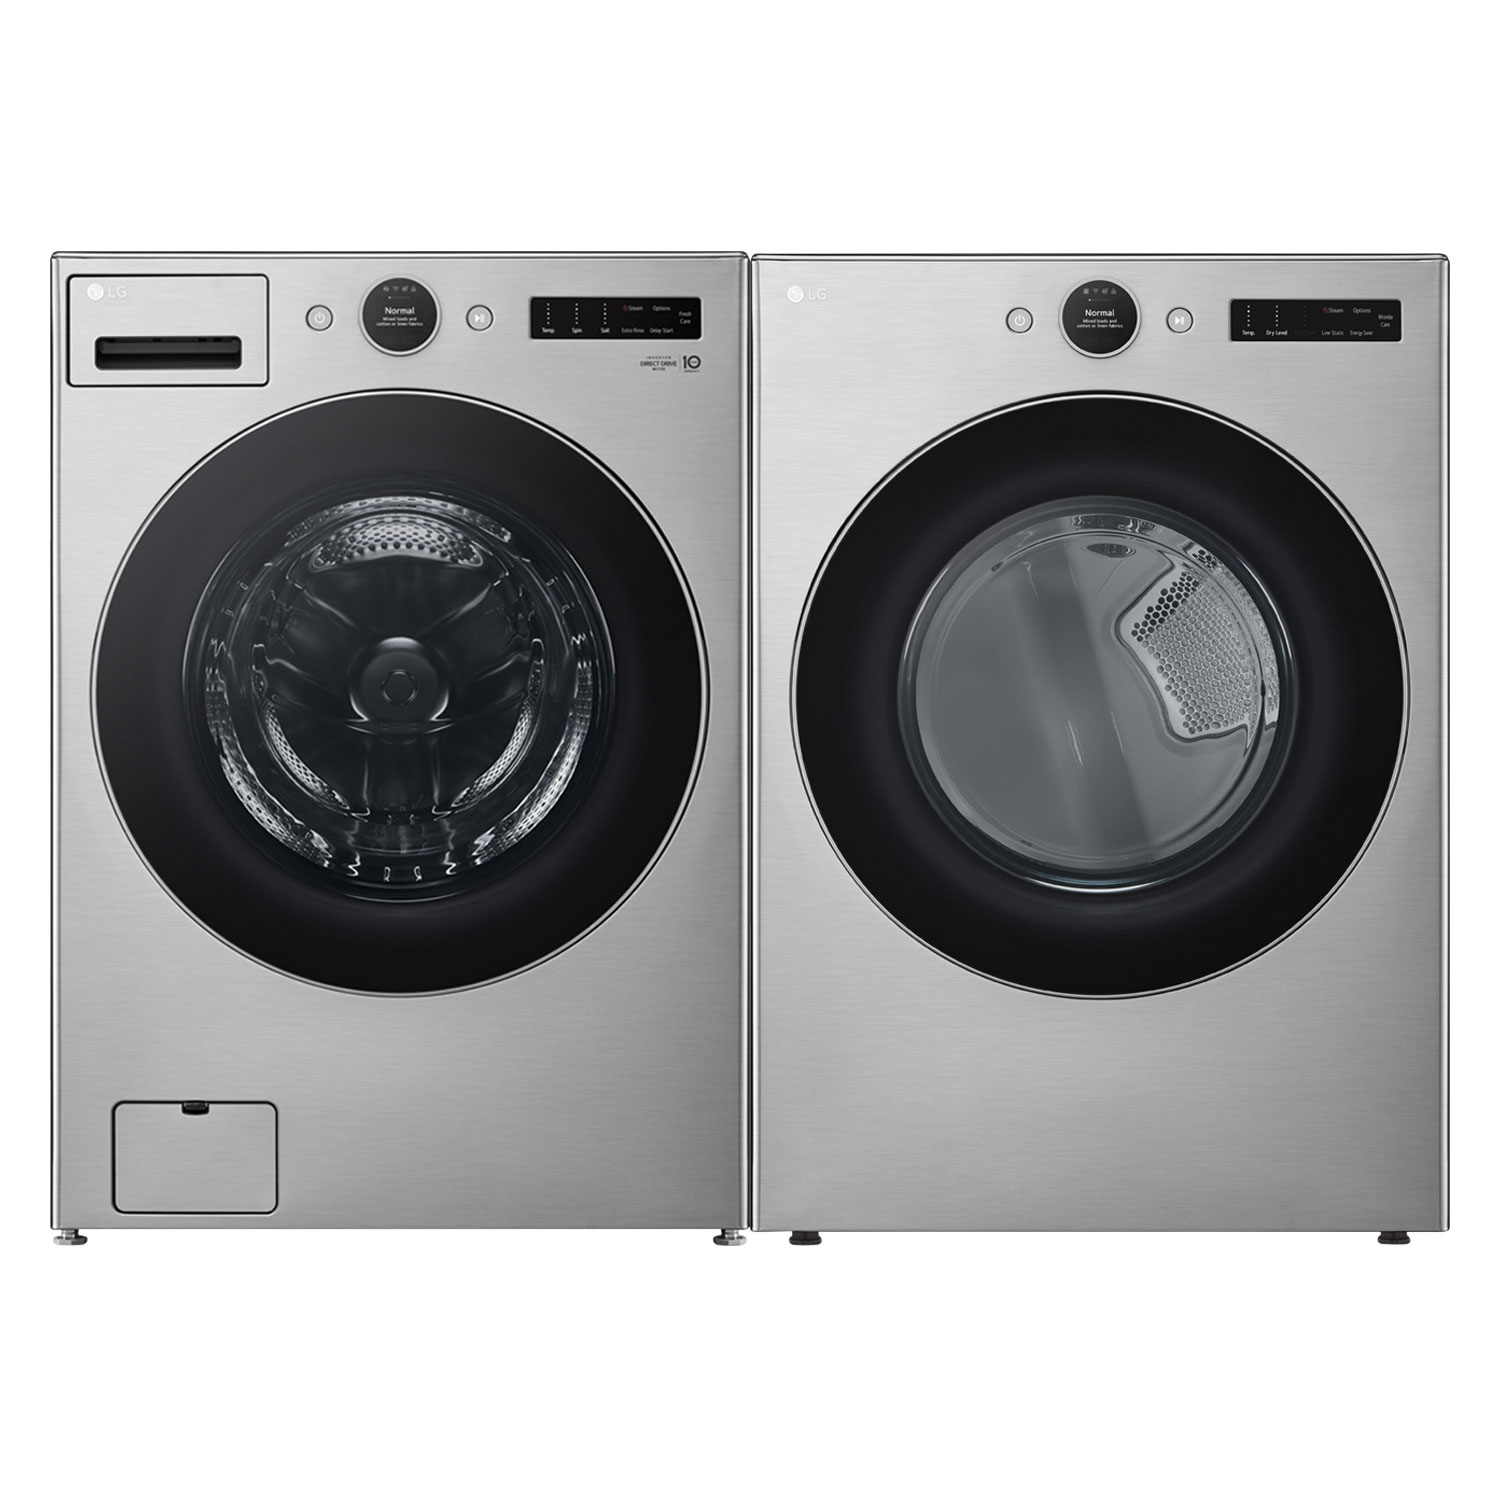 LG 5.2 Cu. Ft. High Efficiency Front Load Steam Washer & 7.4 Cu. Ft. Electric Dryer - Graphite Steel